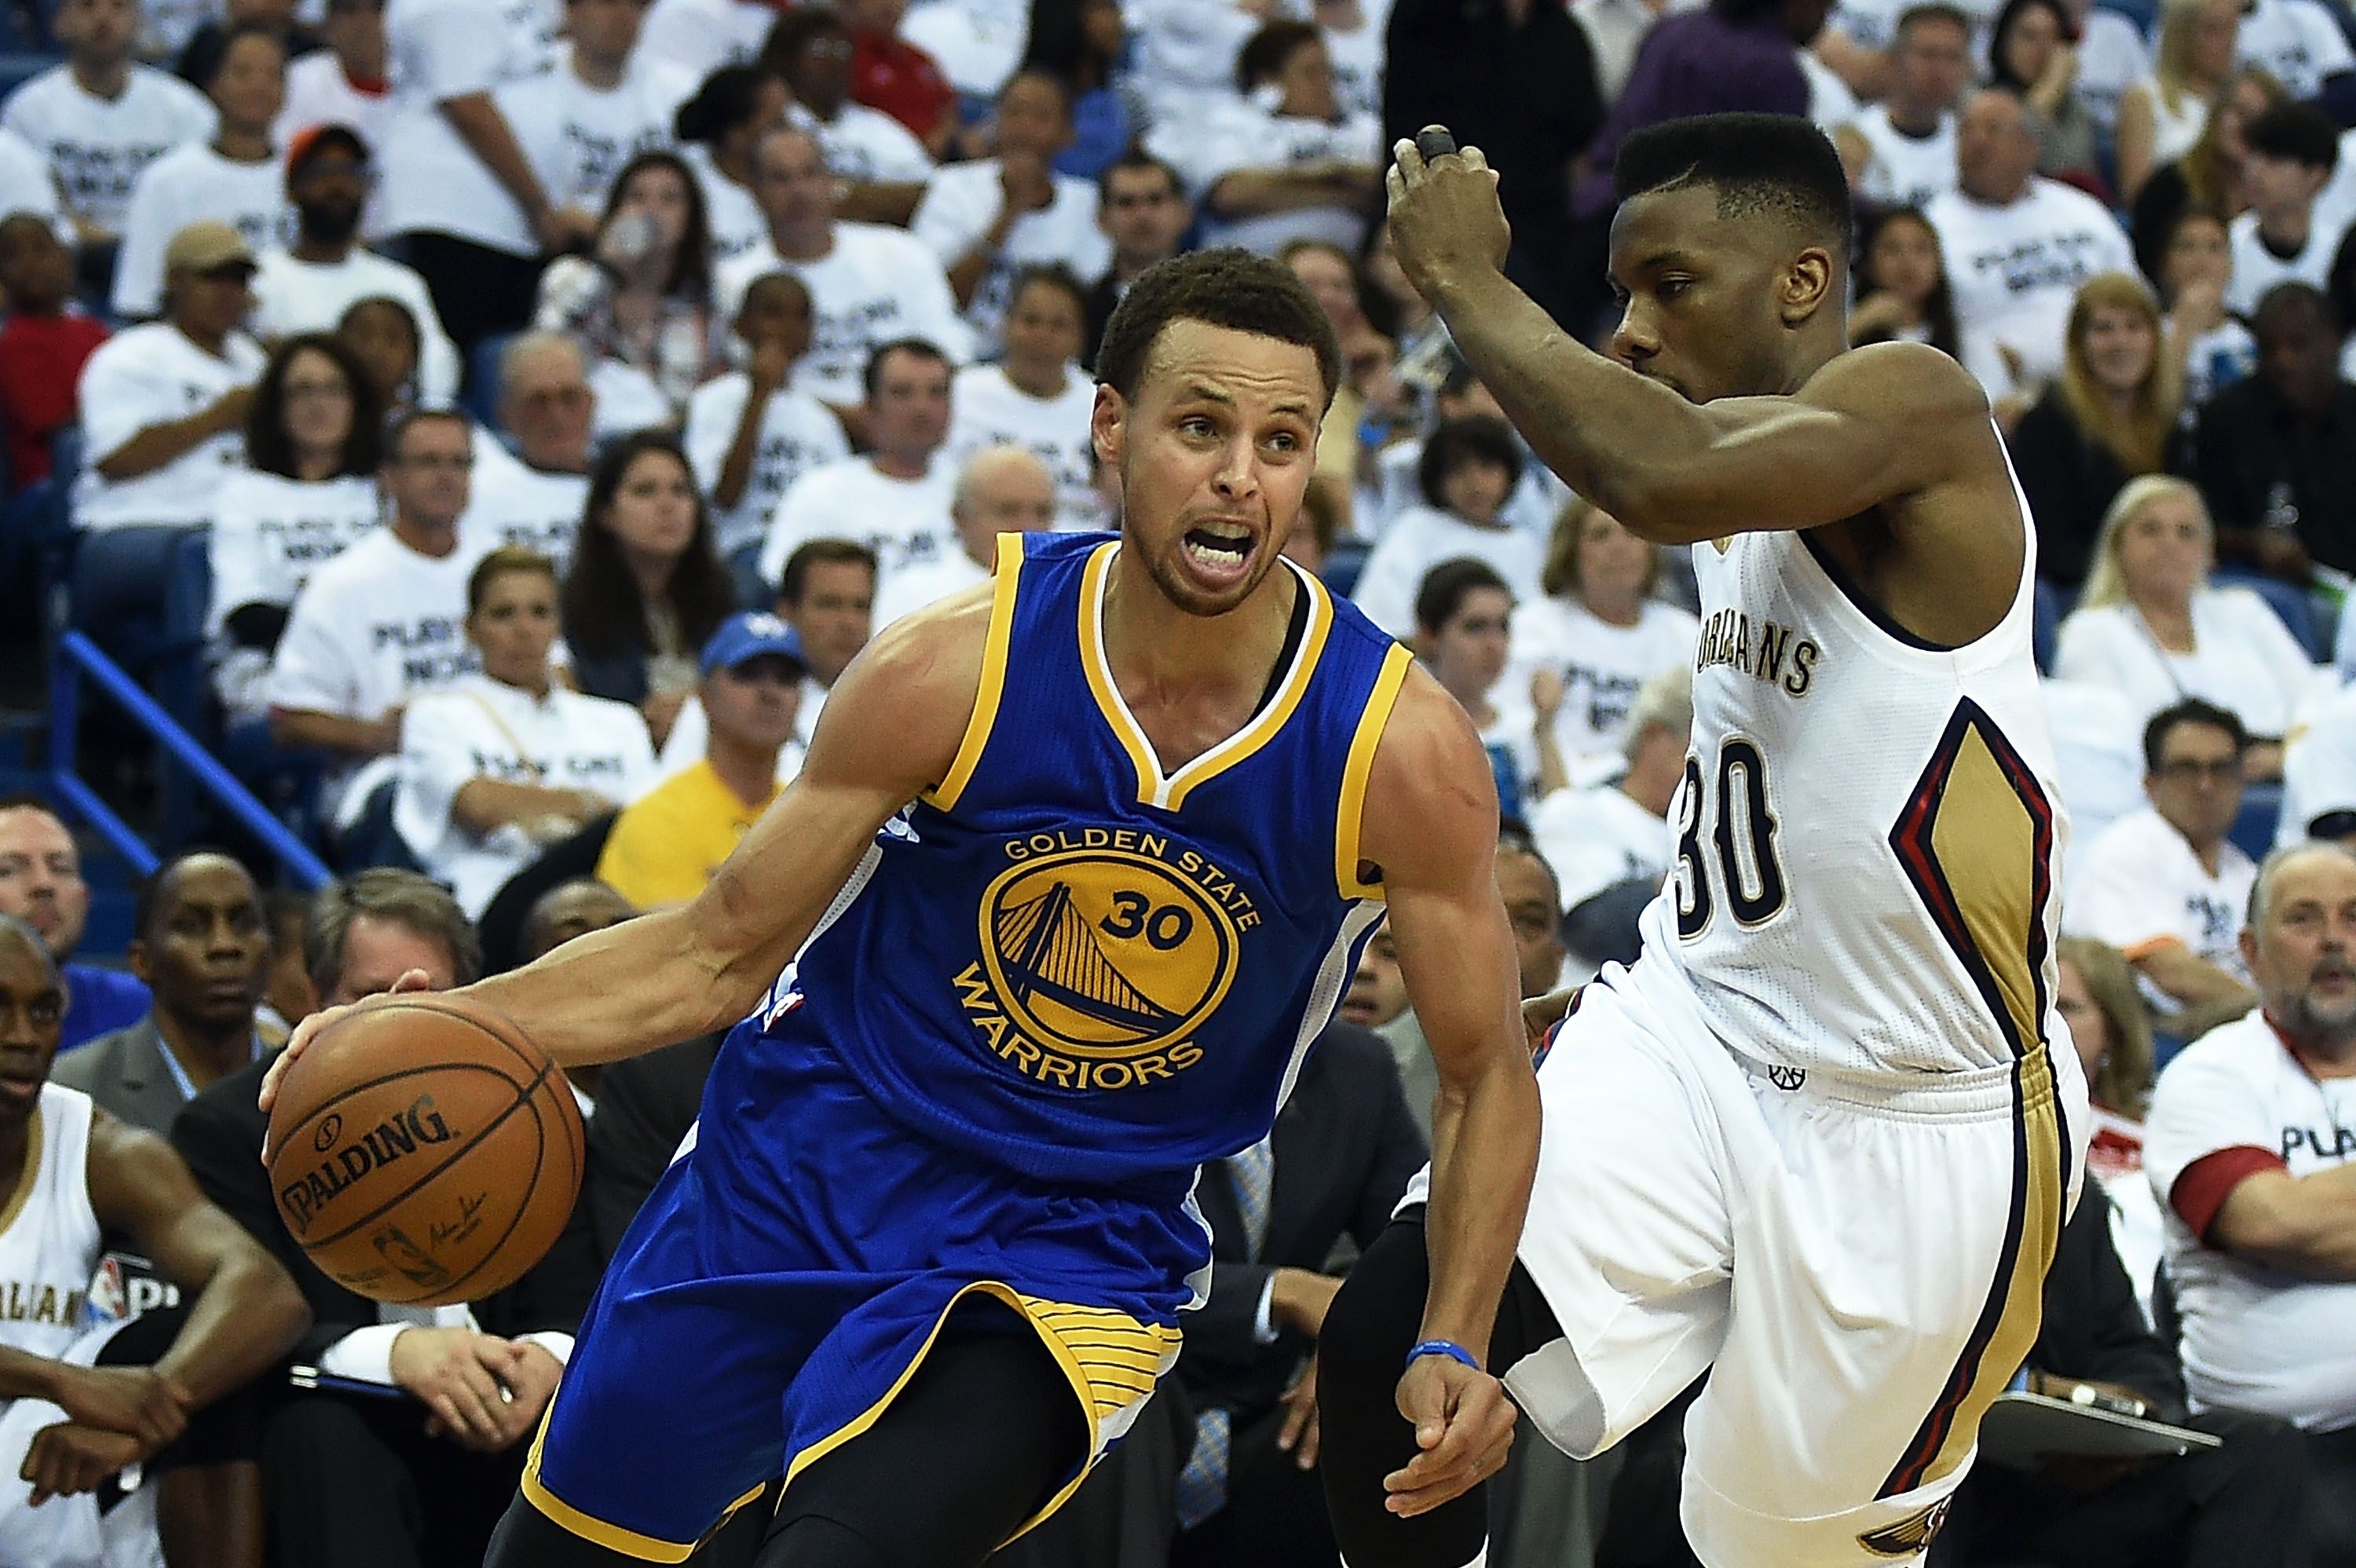 Stephen Curry drives against the Pelicans. Photo: AP